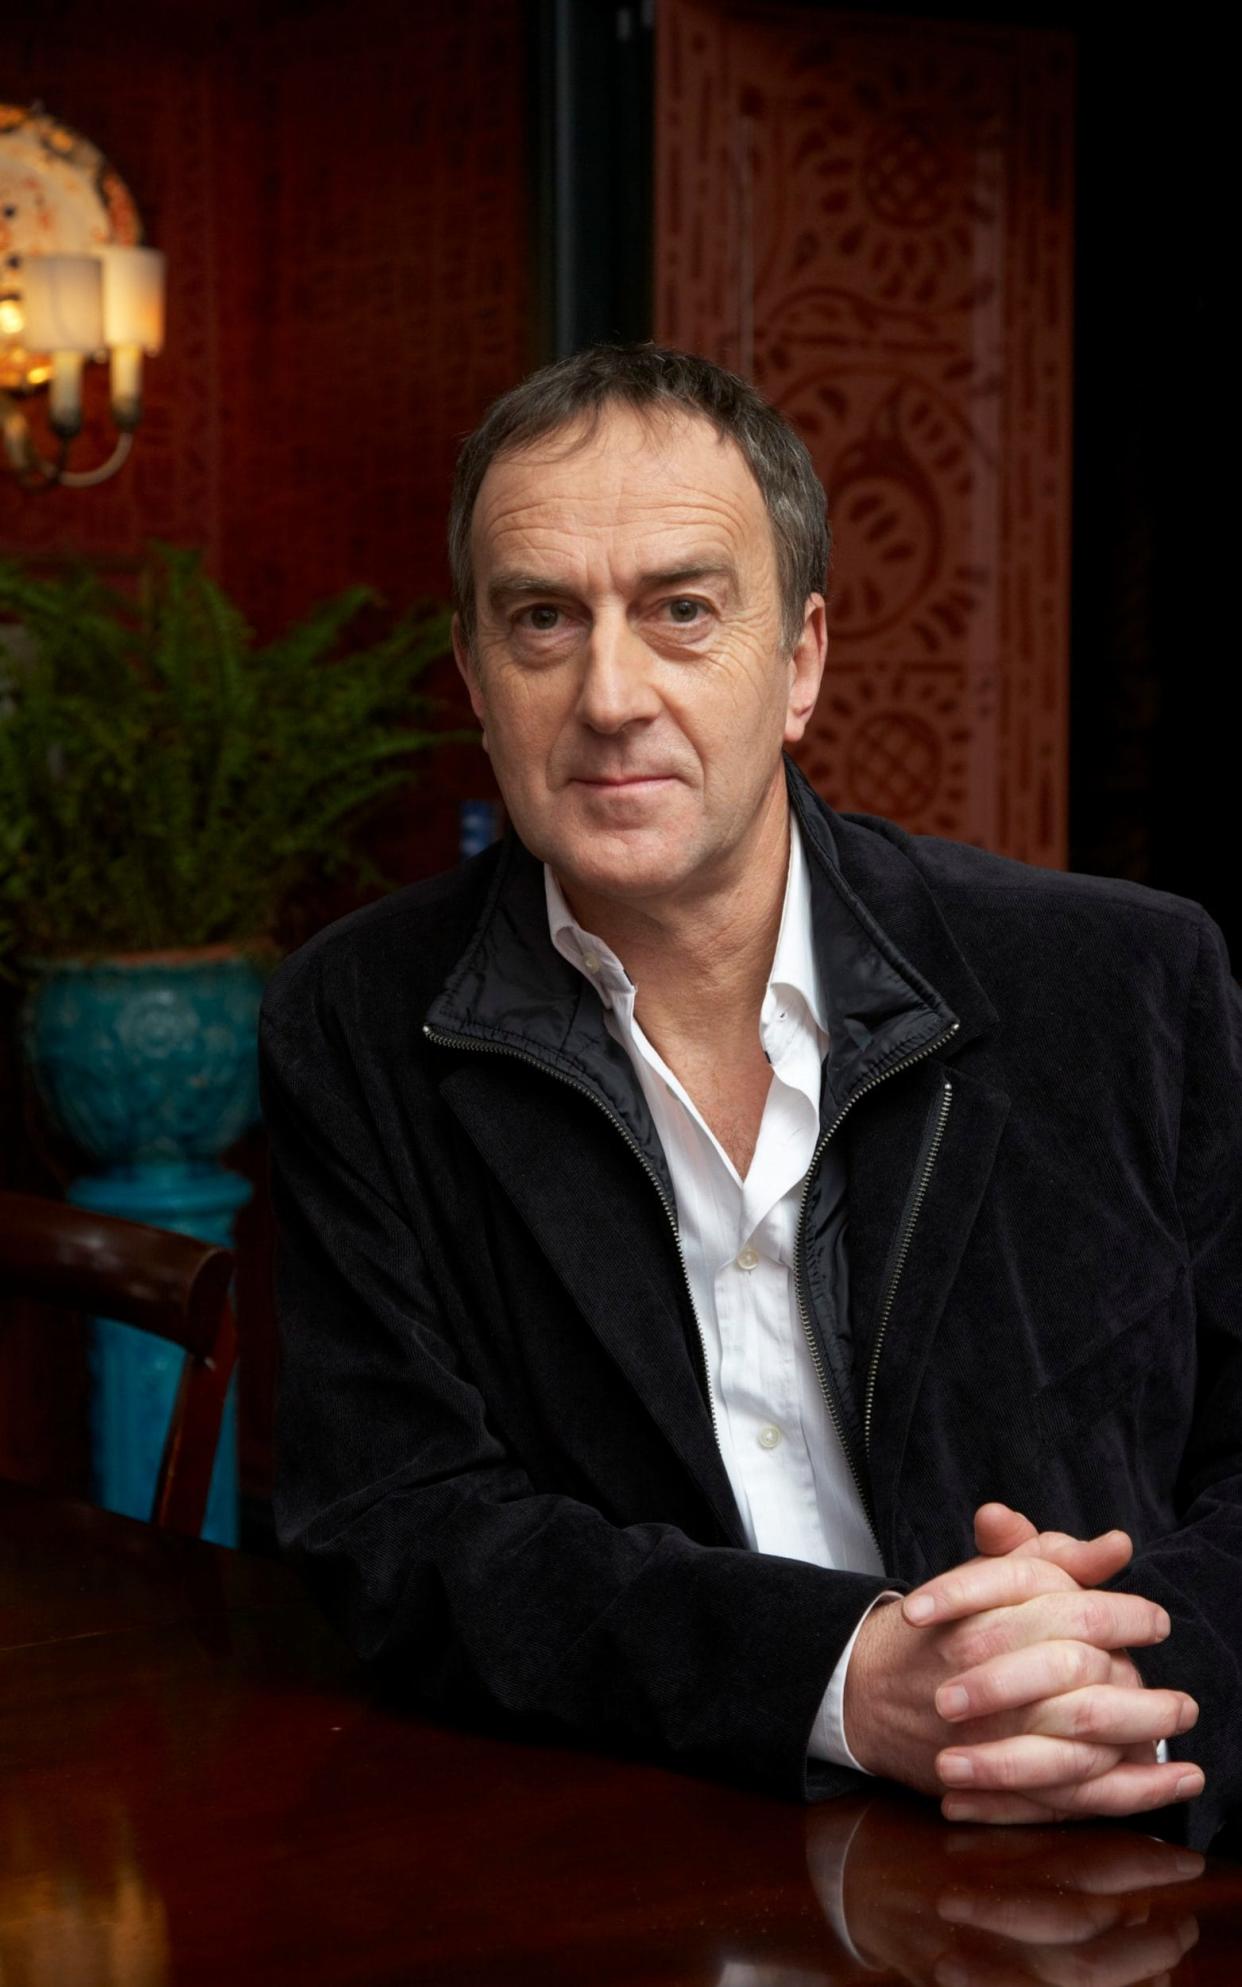 Angus Deayton says his sixties are the best decade yet - © CAMERA PRESS